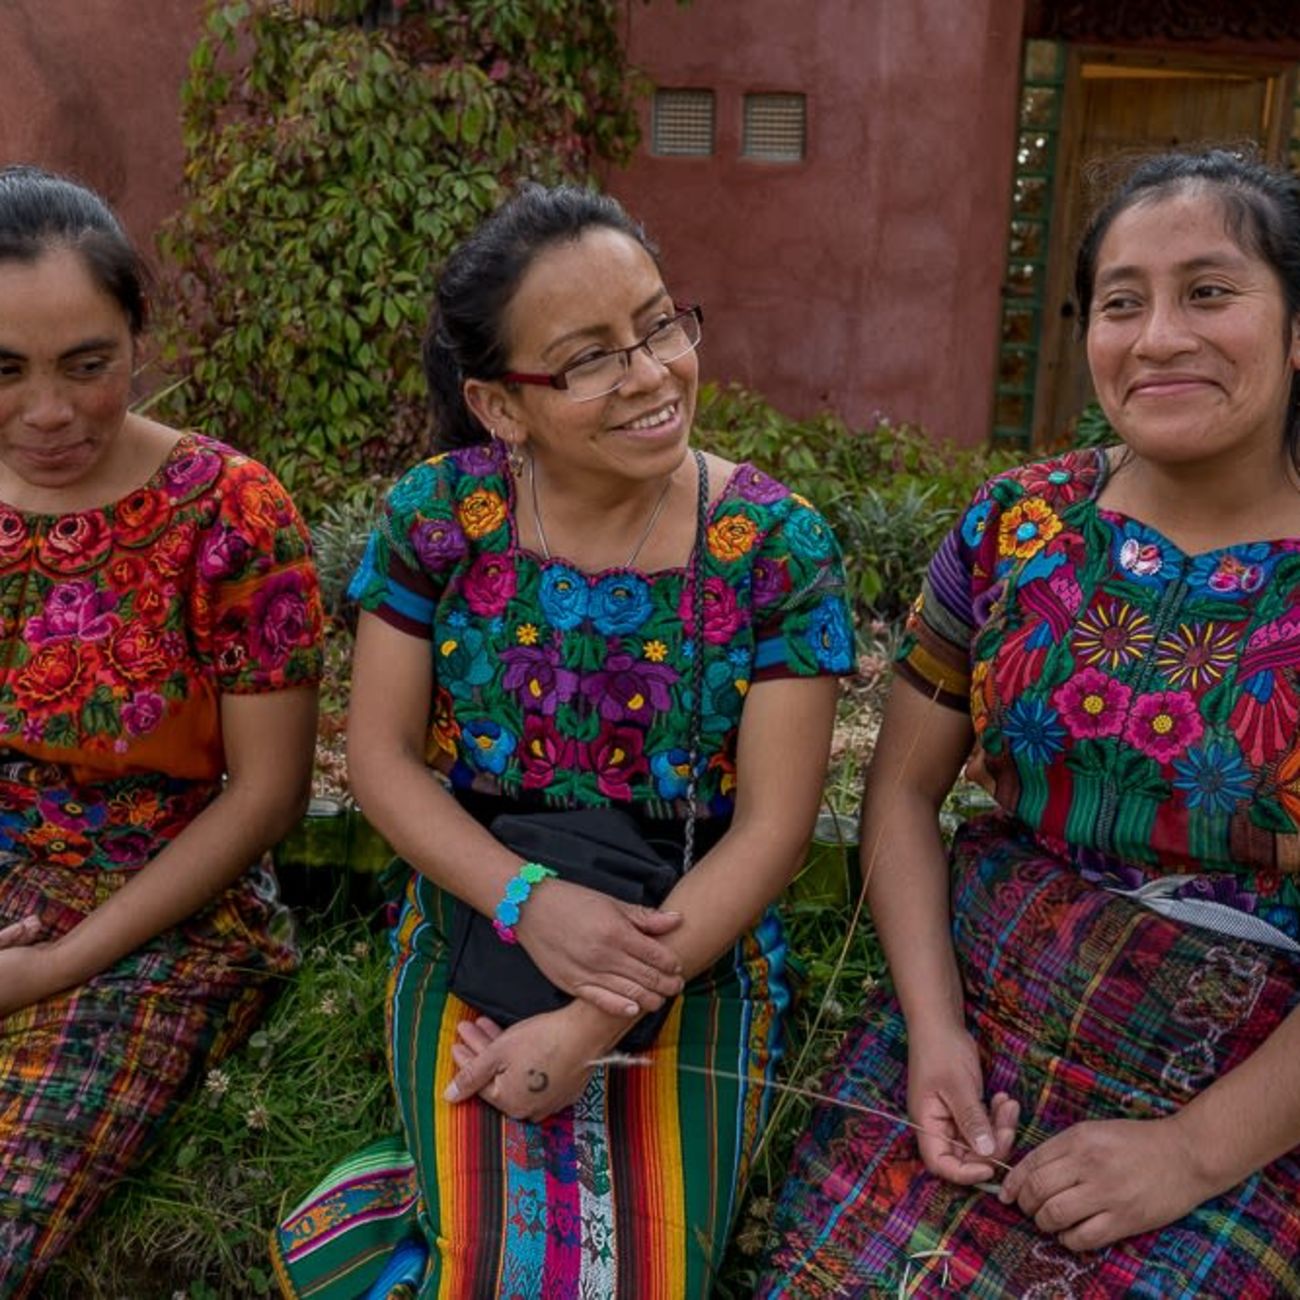 Learn About the Indigenous Guatemalan Community